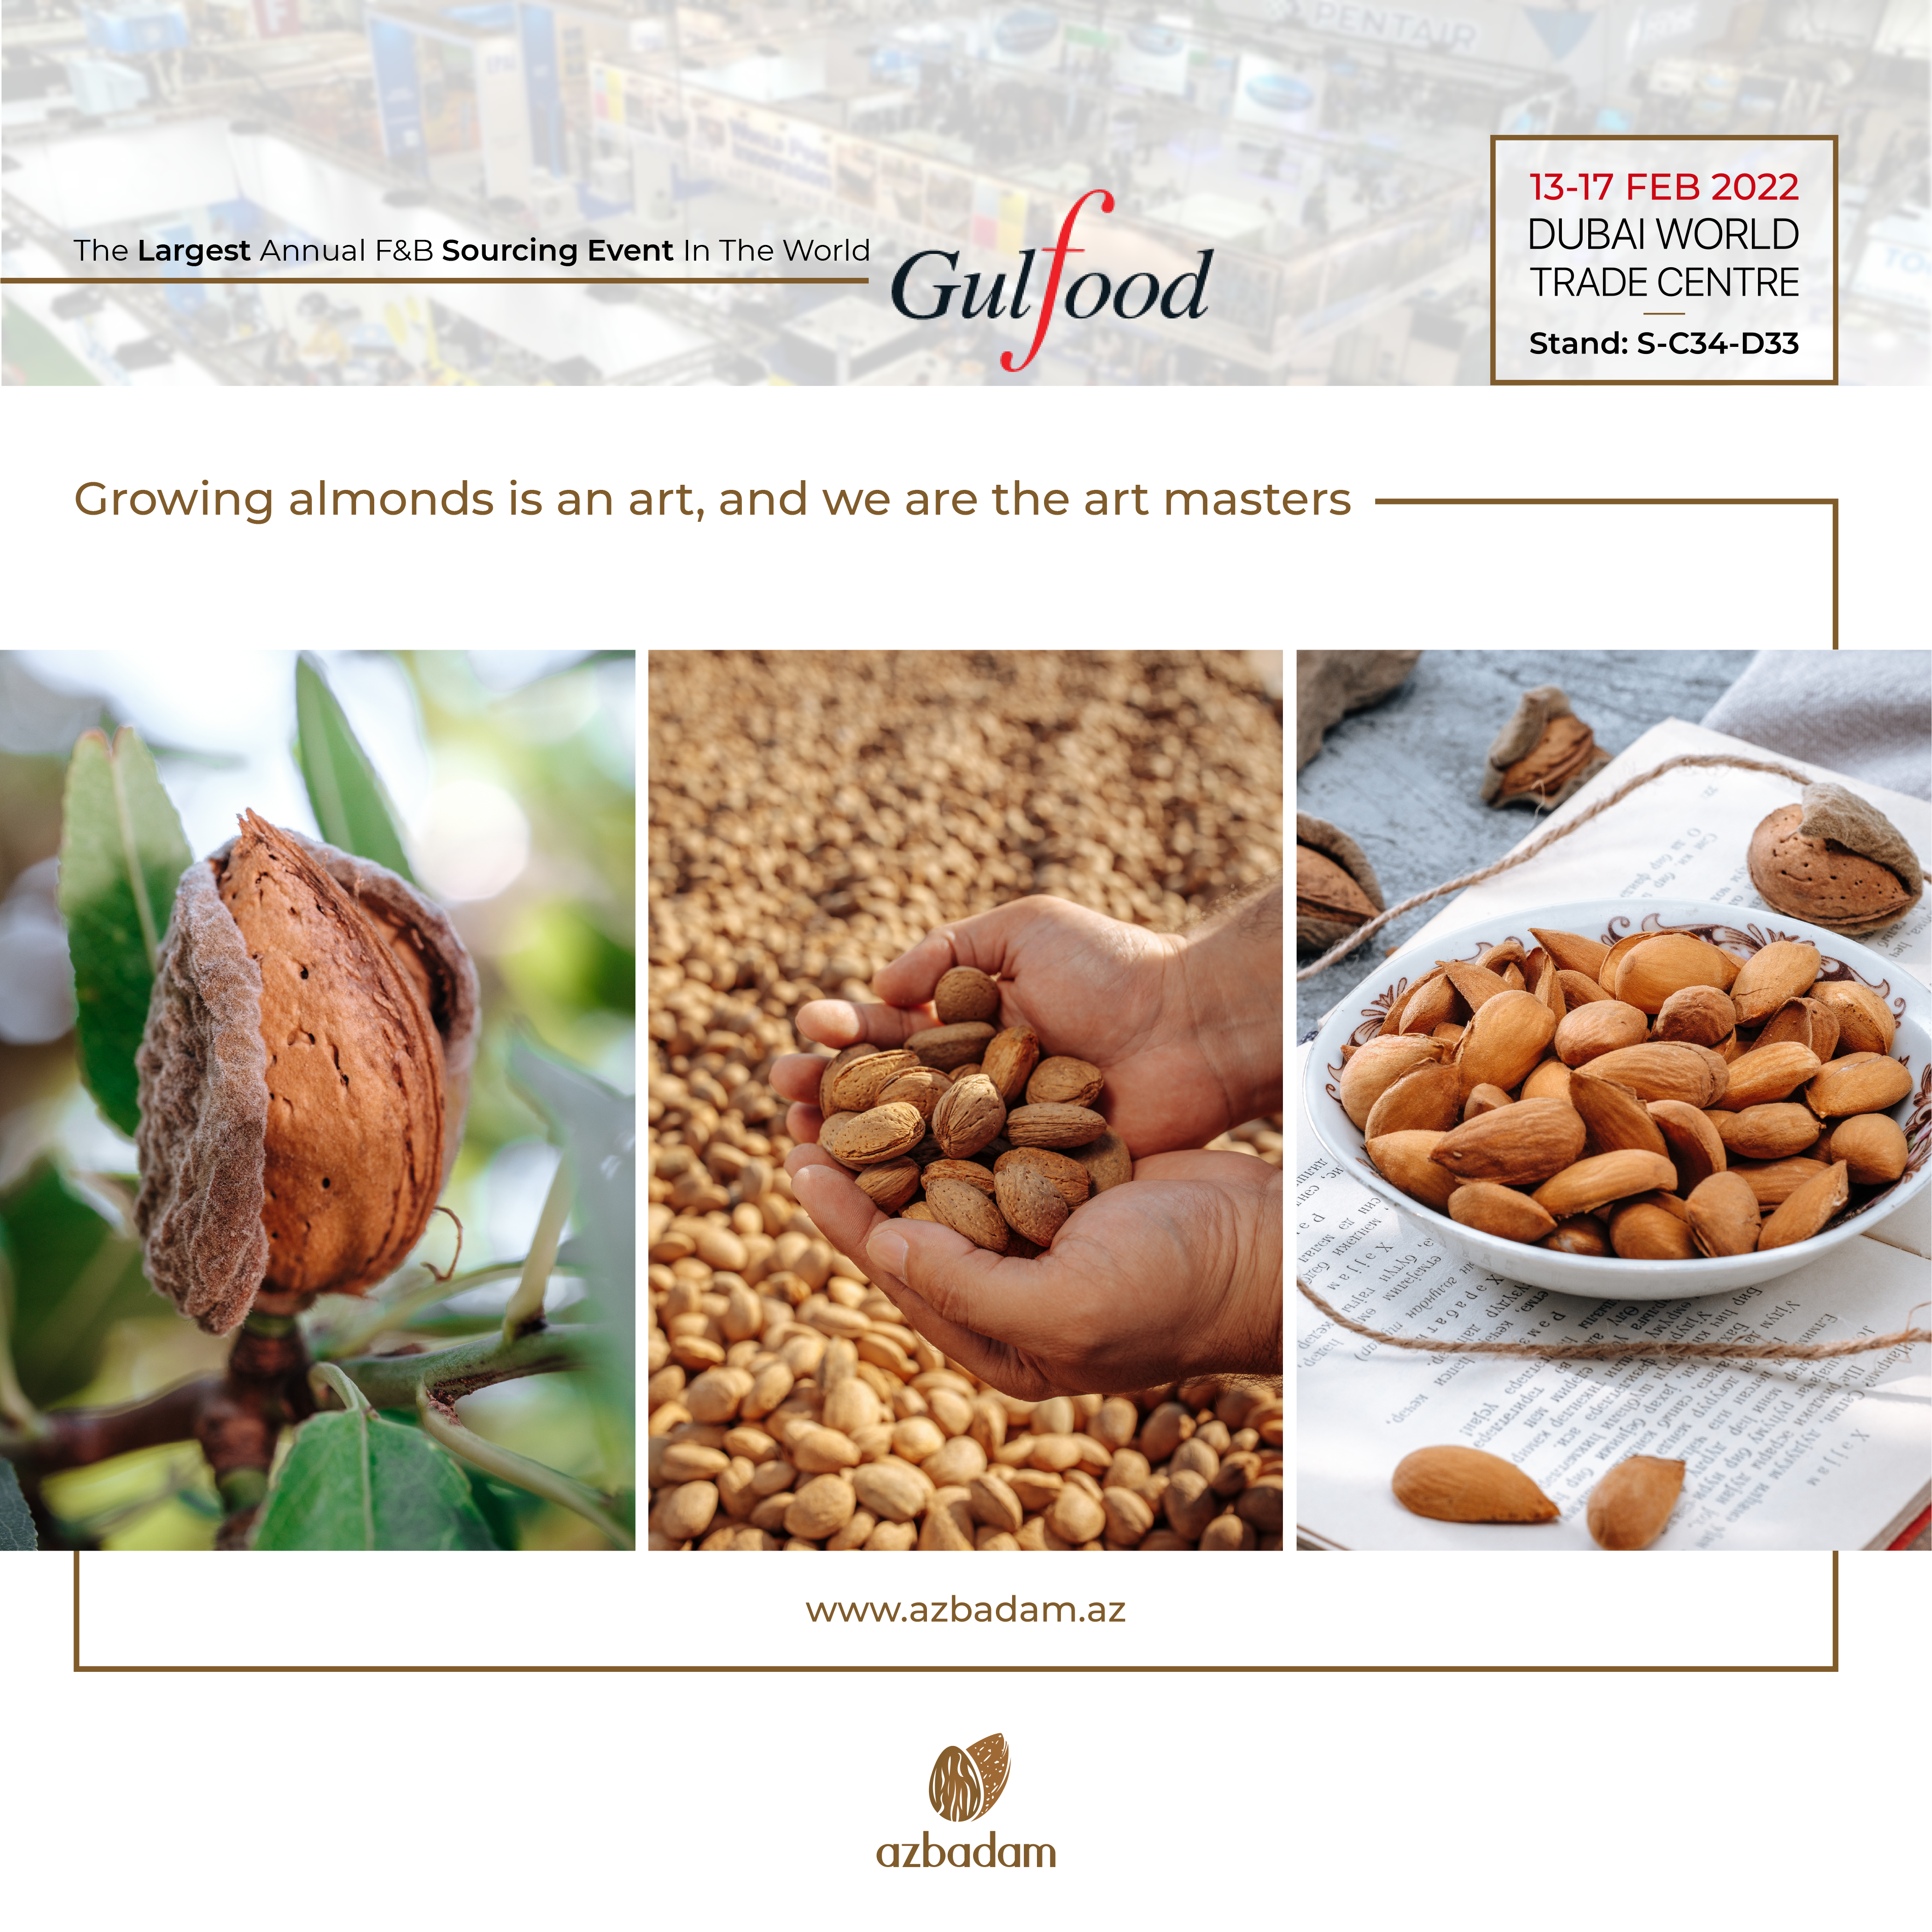  “Gulfood 2022” exhibition participation